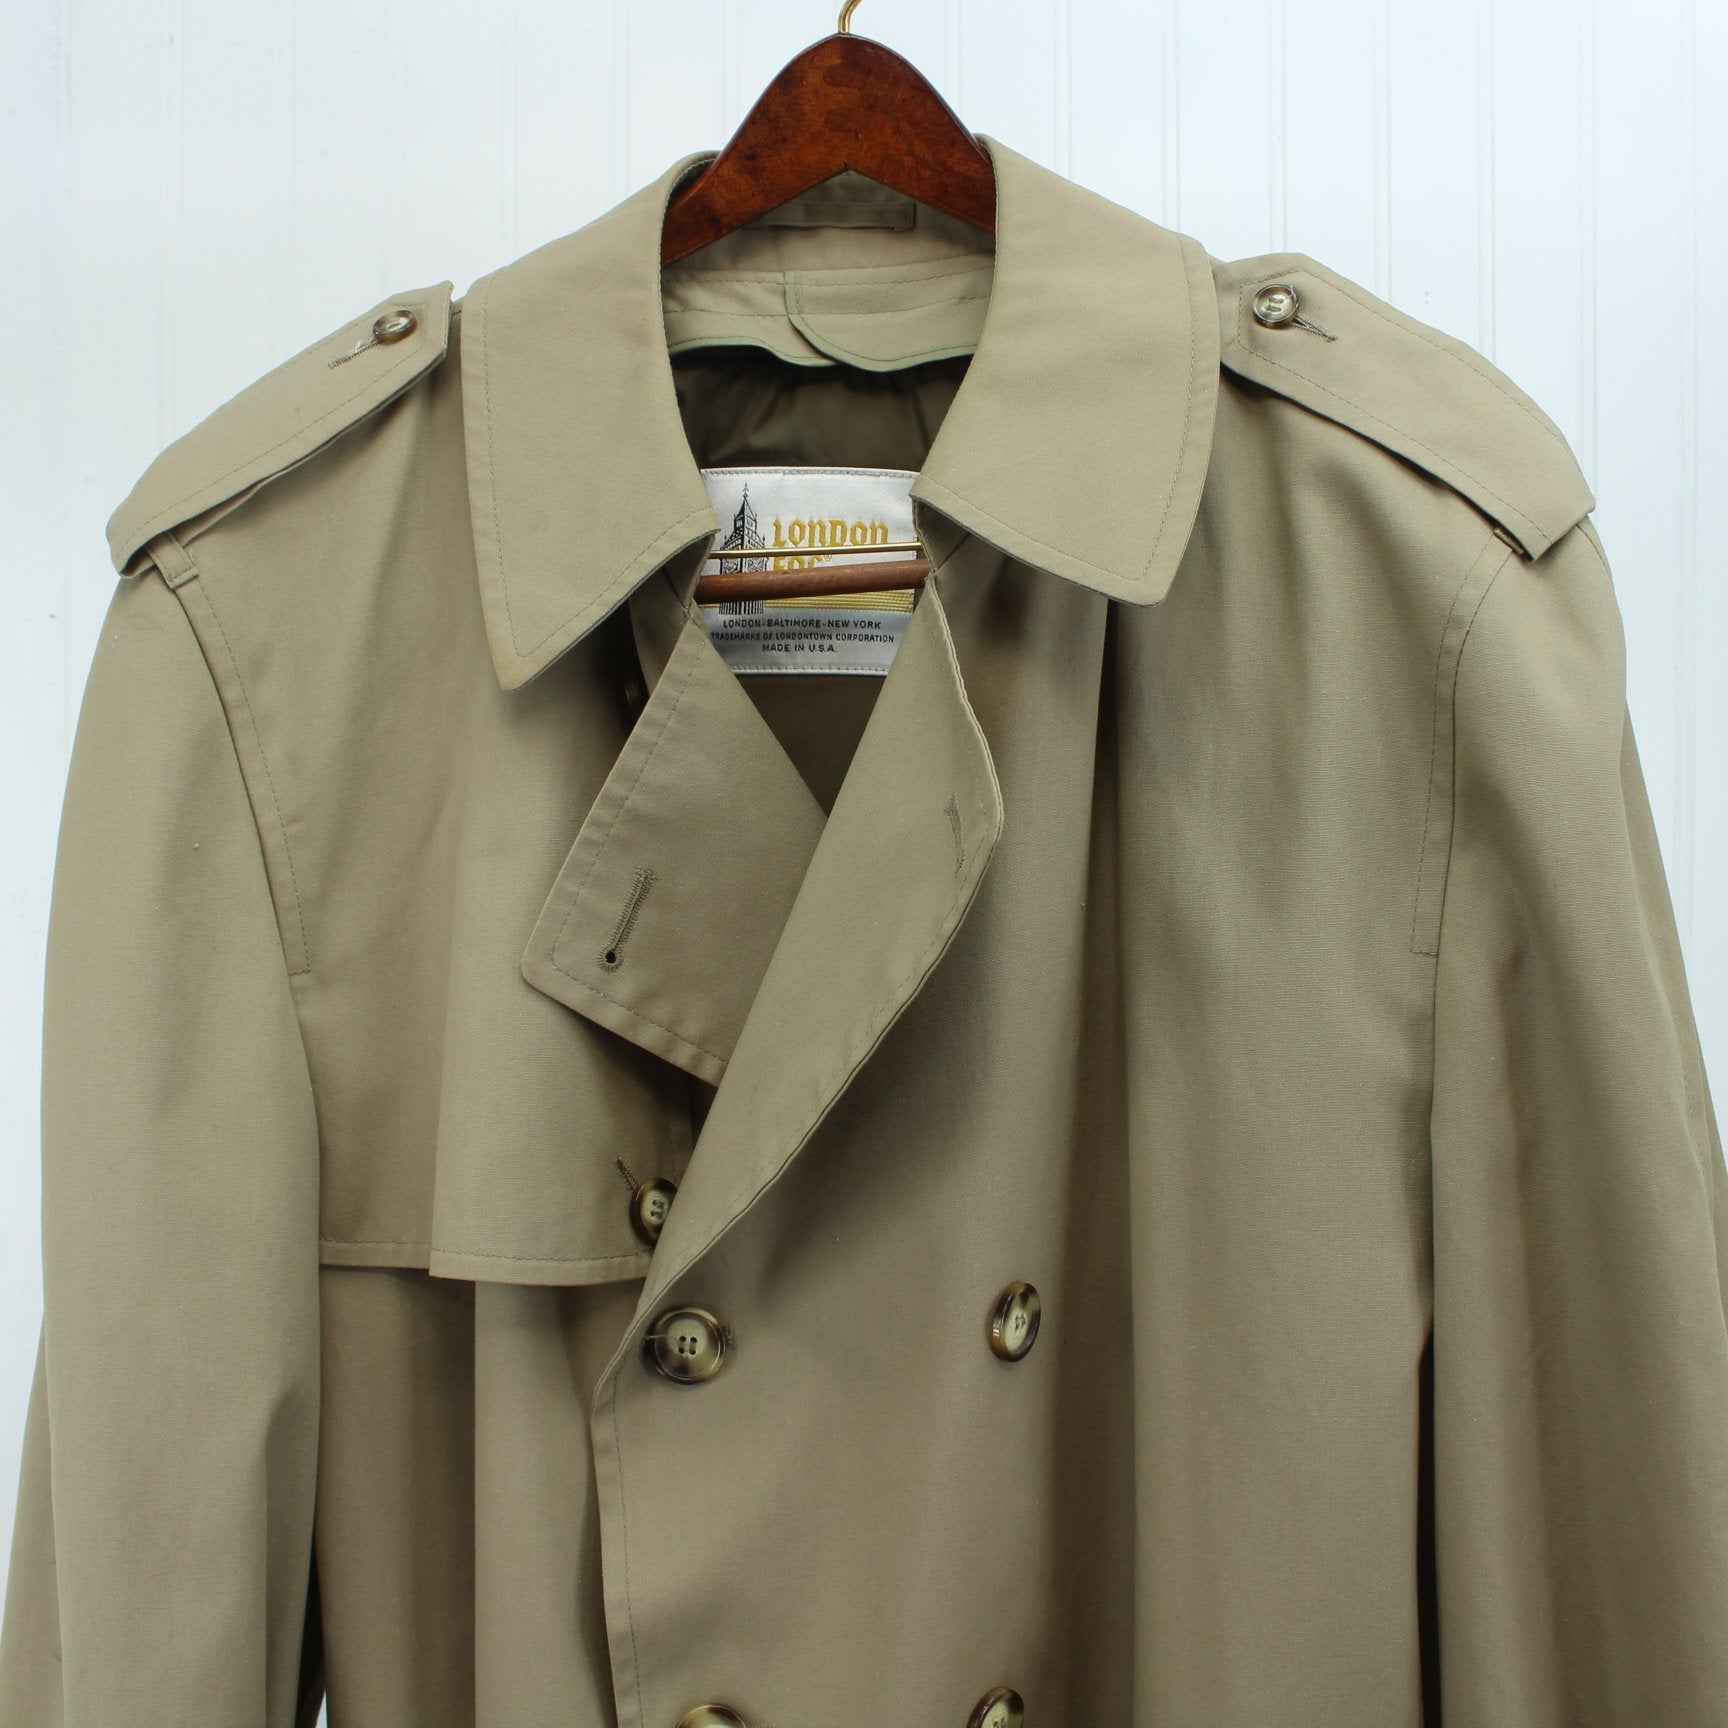 London Fog Trench Coat Men's 46L Dbl Breast Removable Thinsulate Lining front upper coat